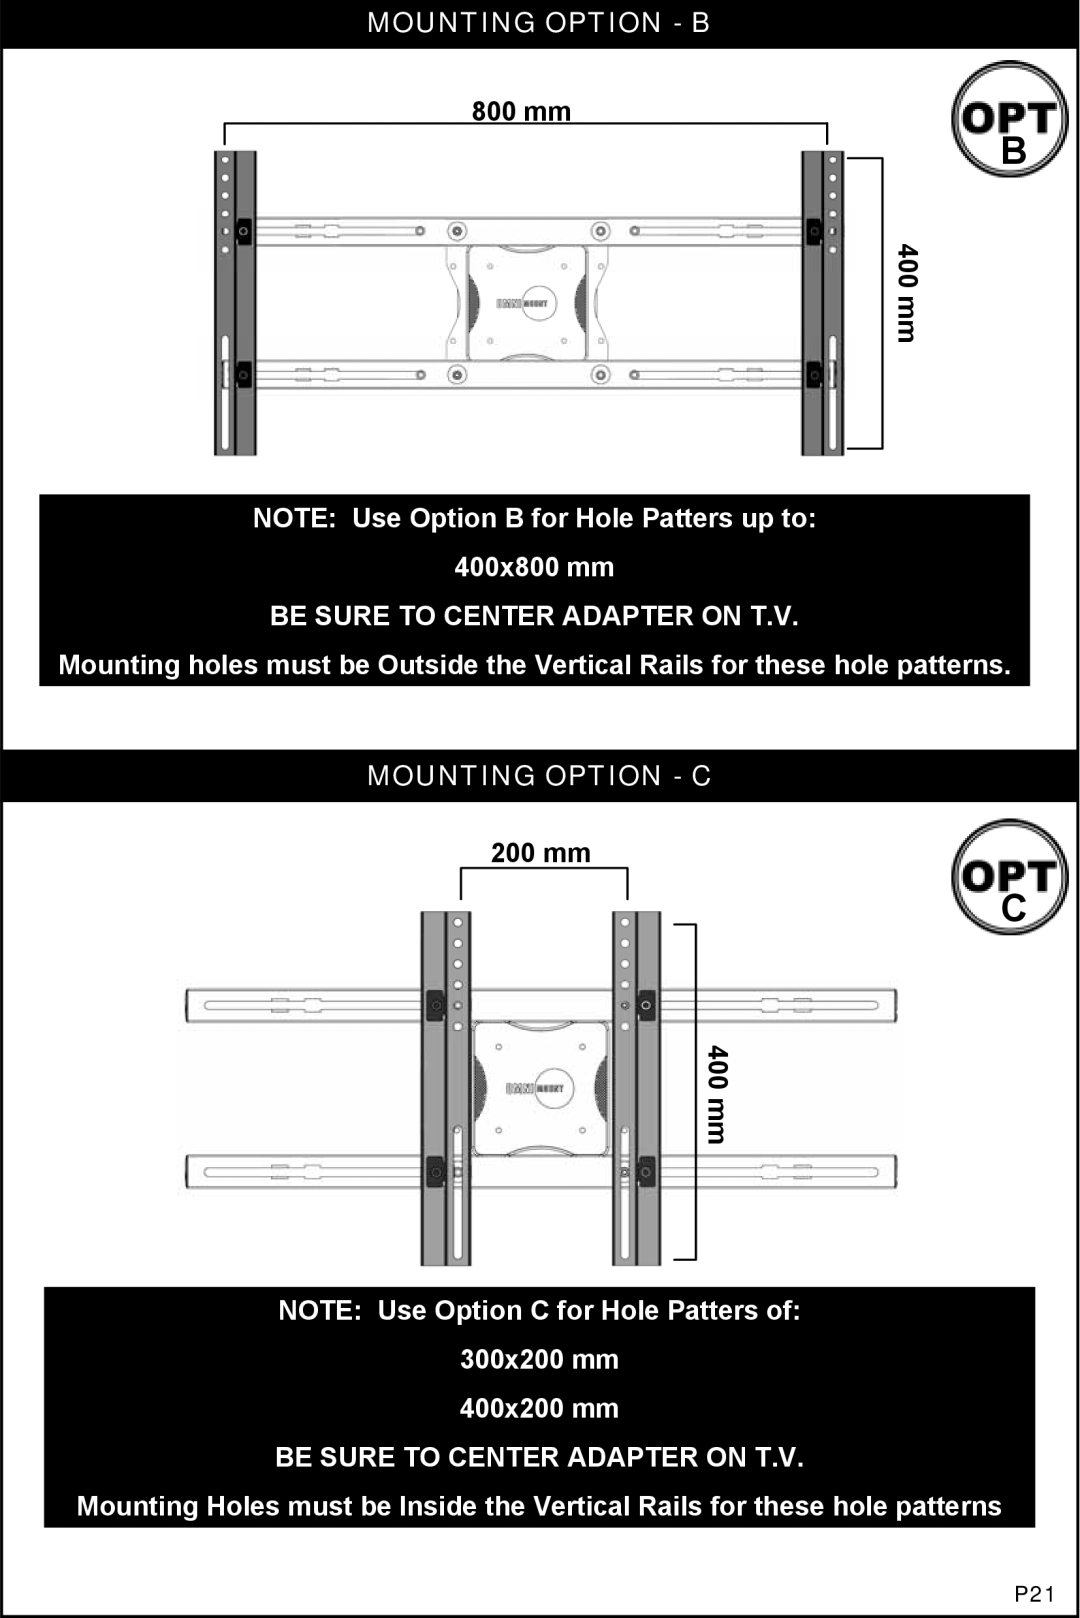 Omnimount 1004114, NC200C Mounting Option - B, 400 mm, NOTE Use Option B for Hole Patters up to 400x800 mm, 200 mm 